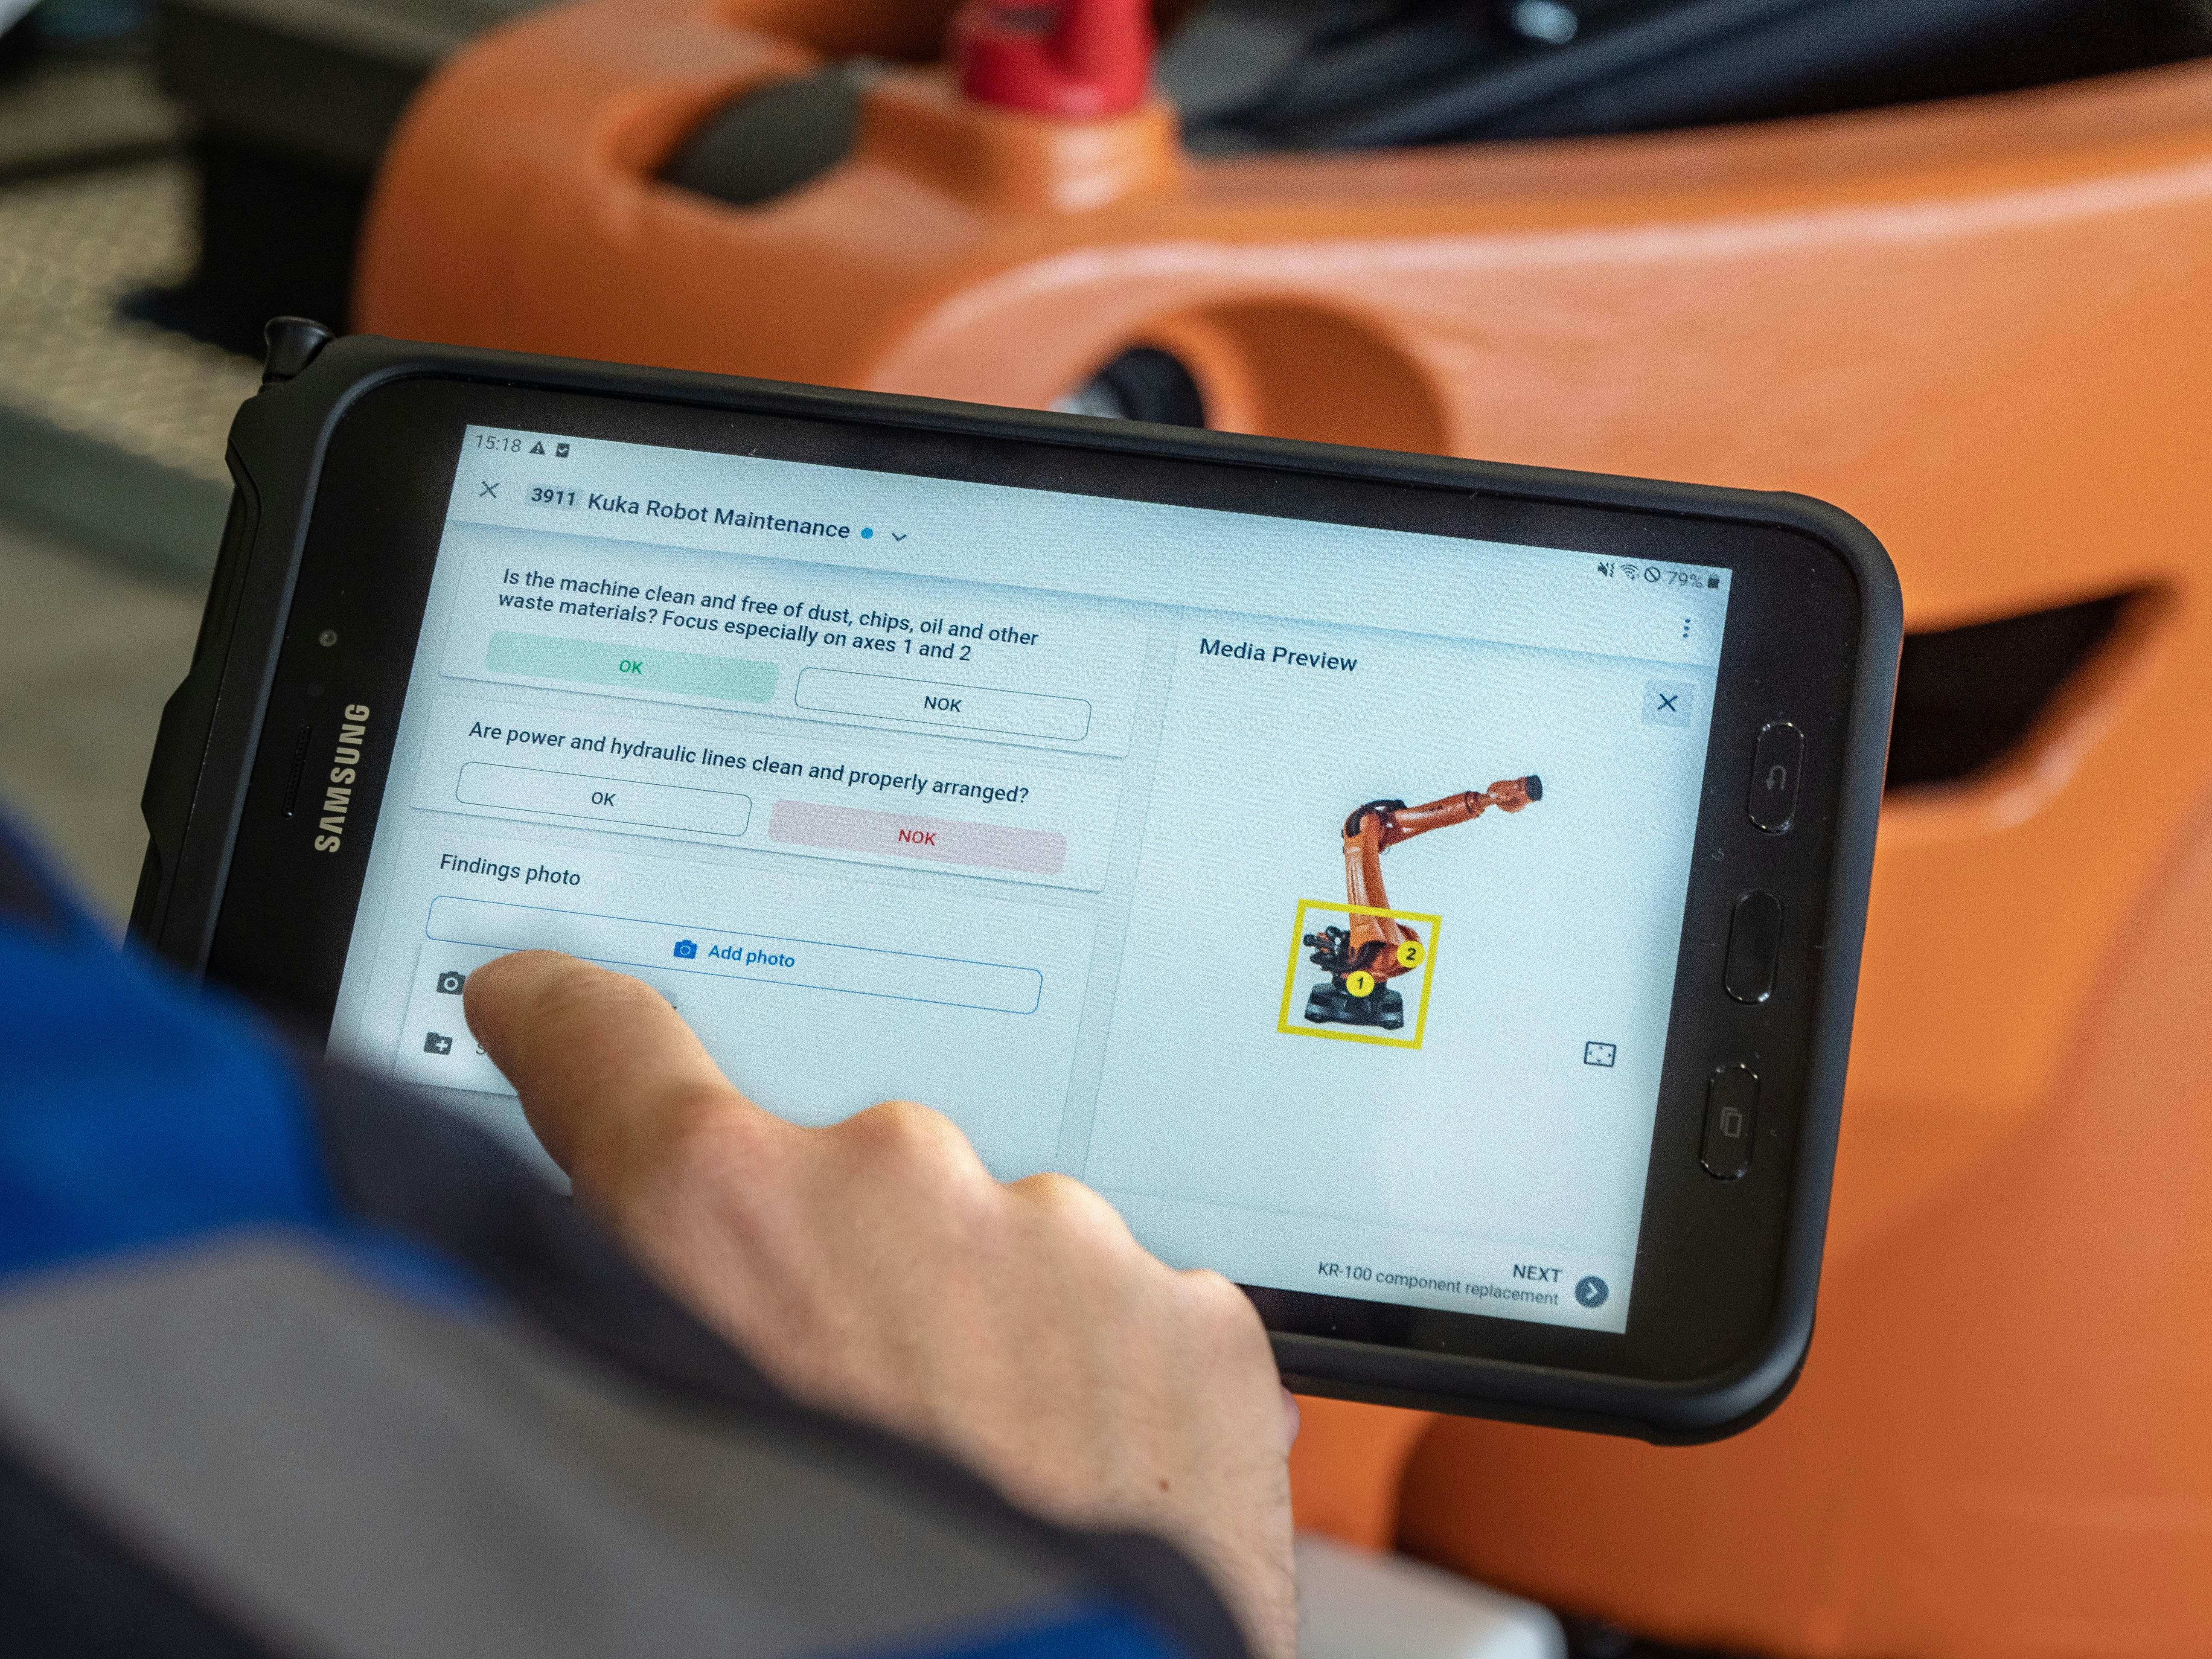 Worker uses the operations1 software to be guided through a kuka robot maintenance job